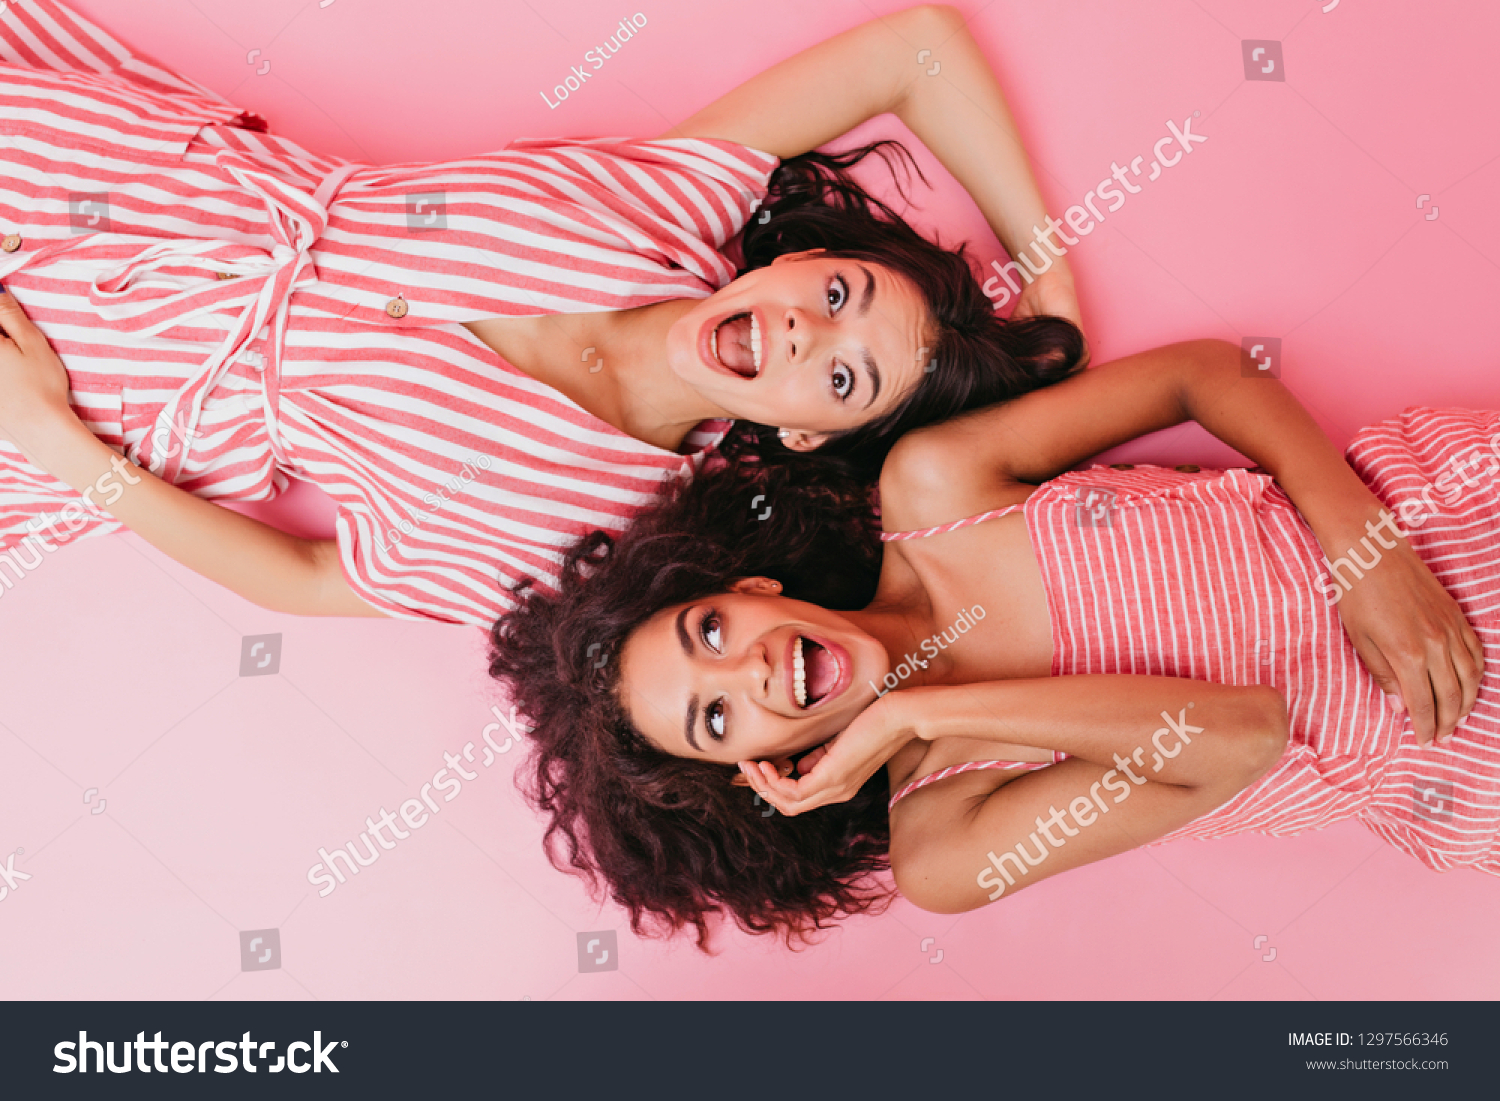 On isolated background two dark-skinned girls with beautiful hair and surprised faces pose for camera while lying on their backs #1297566346